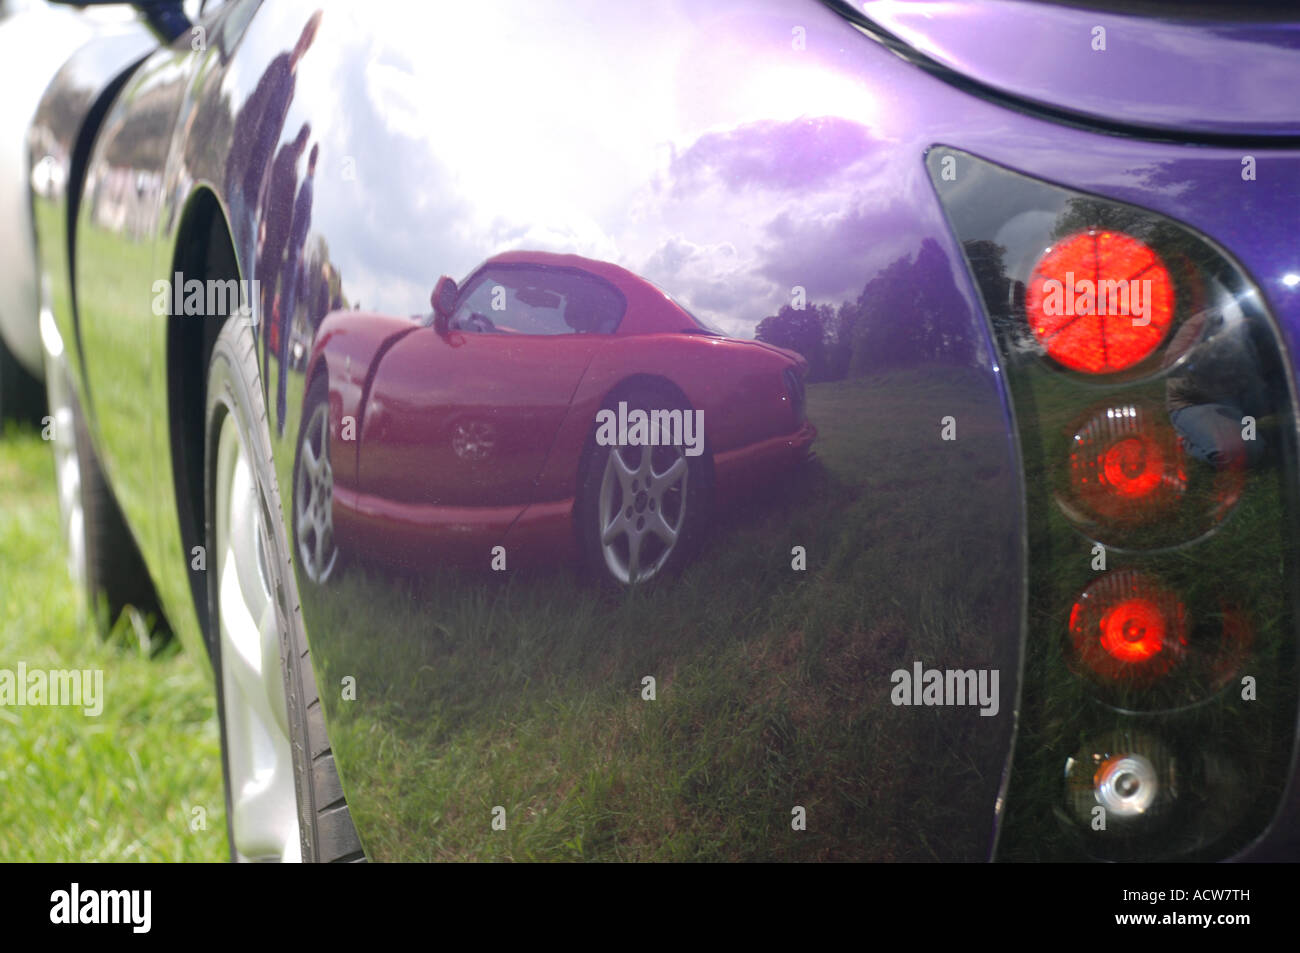 TVR reflected in a TVR Stock Photo